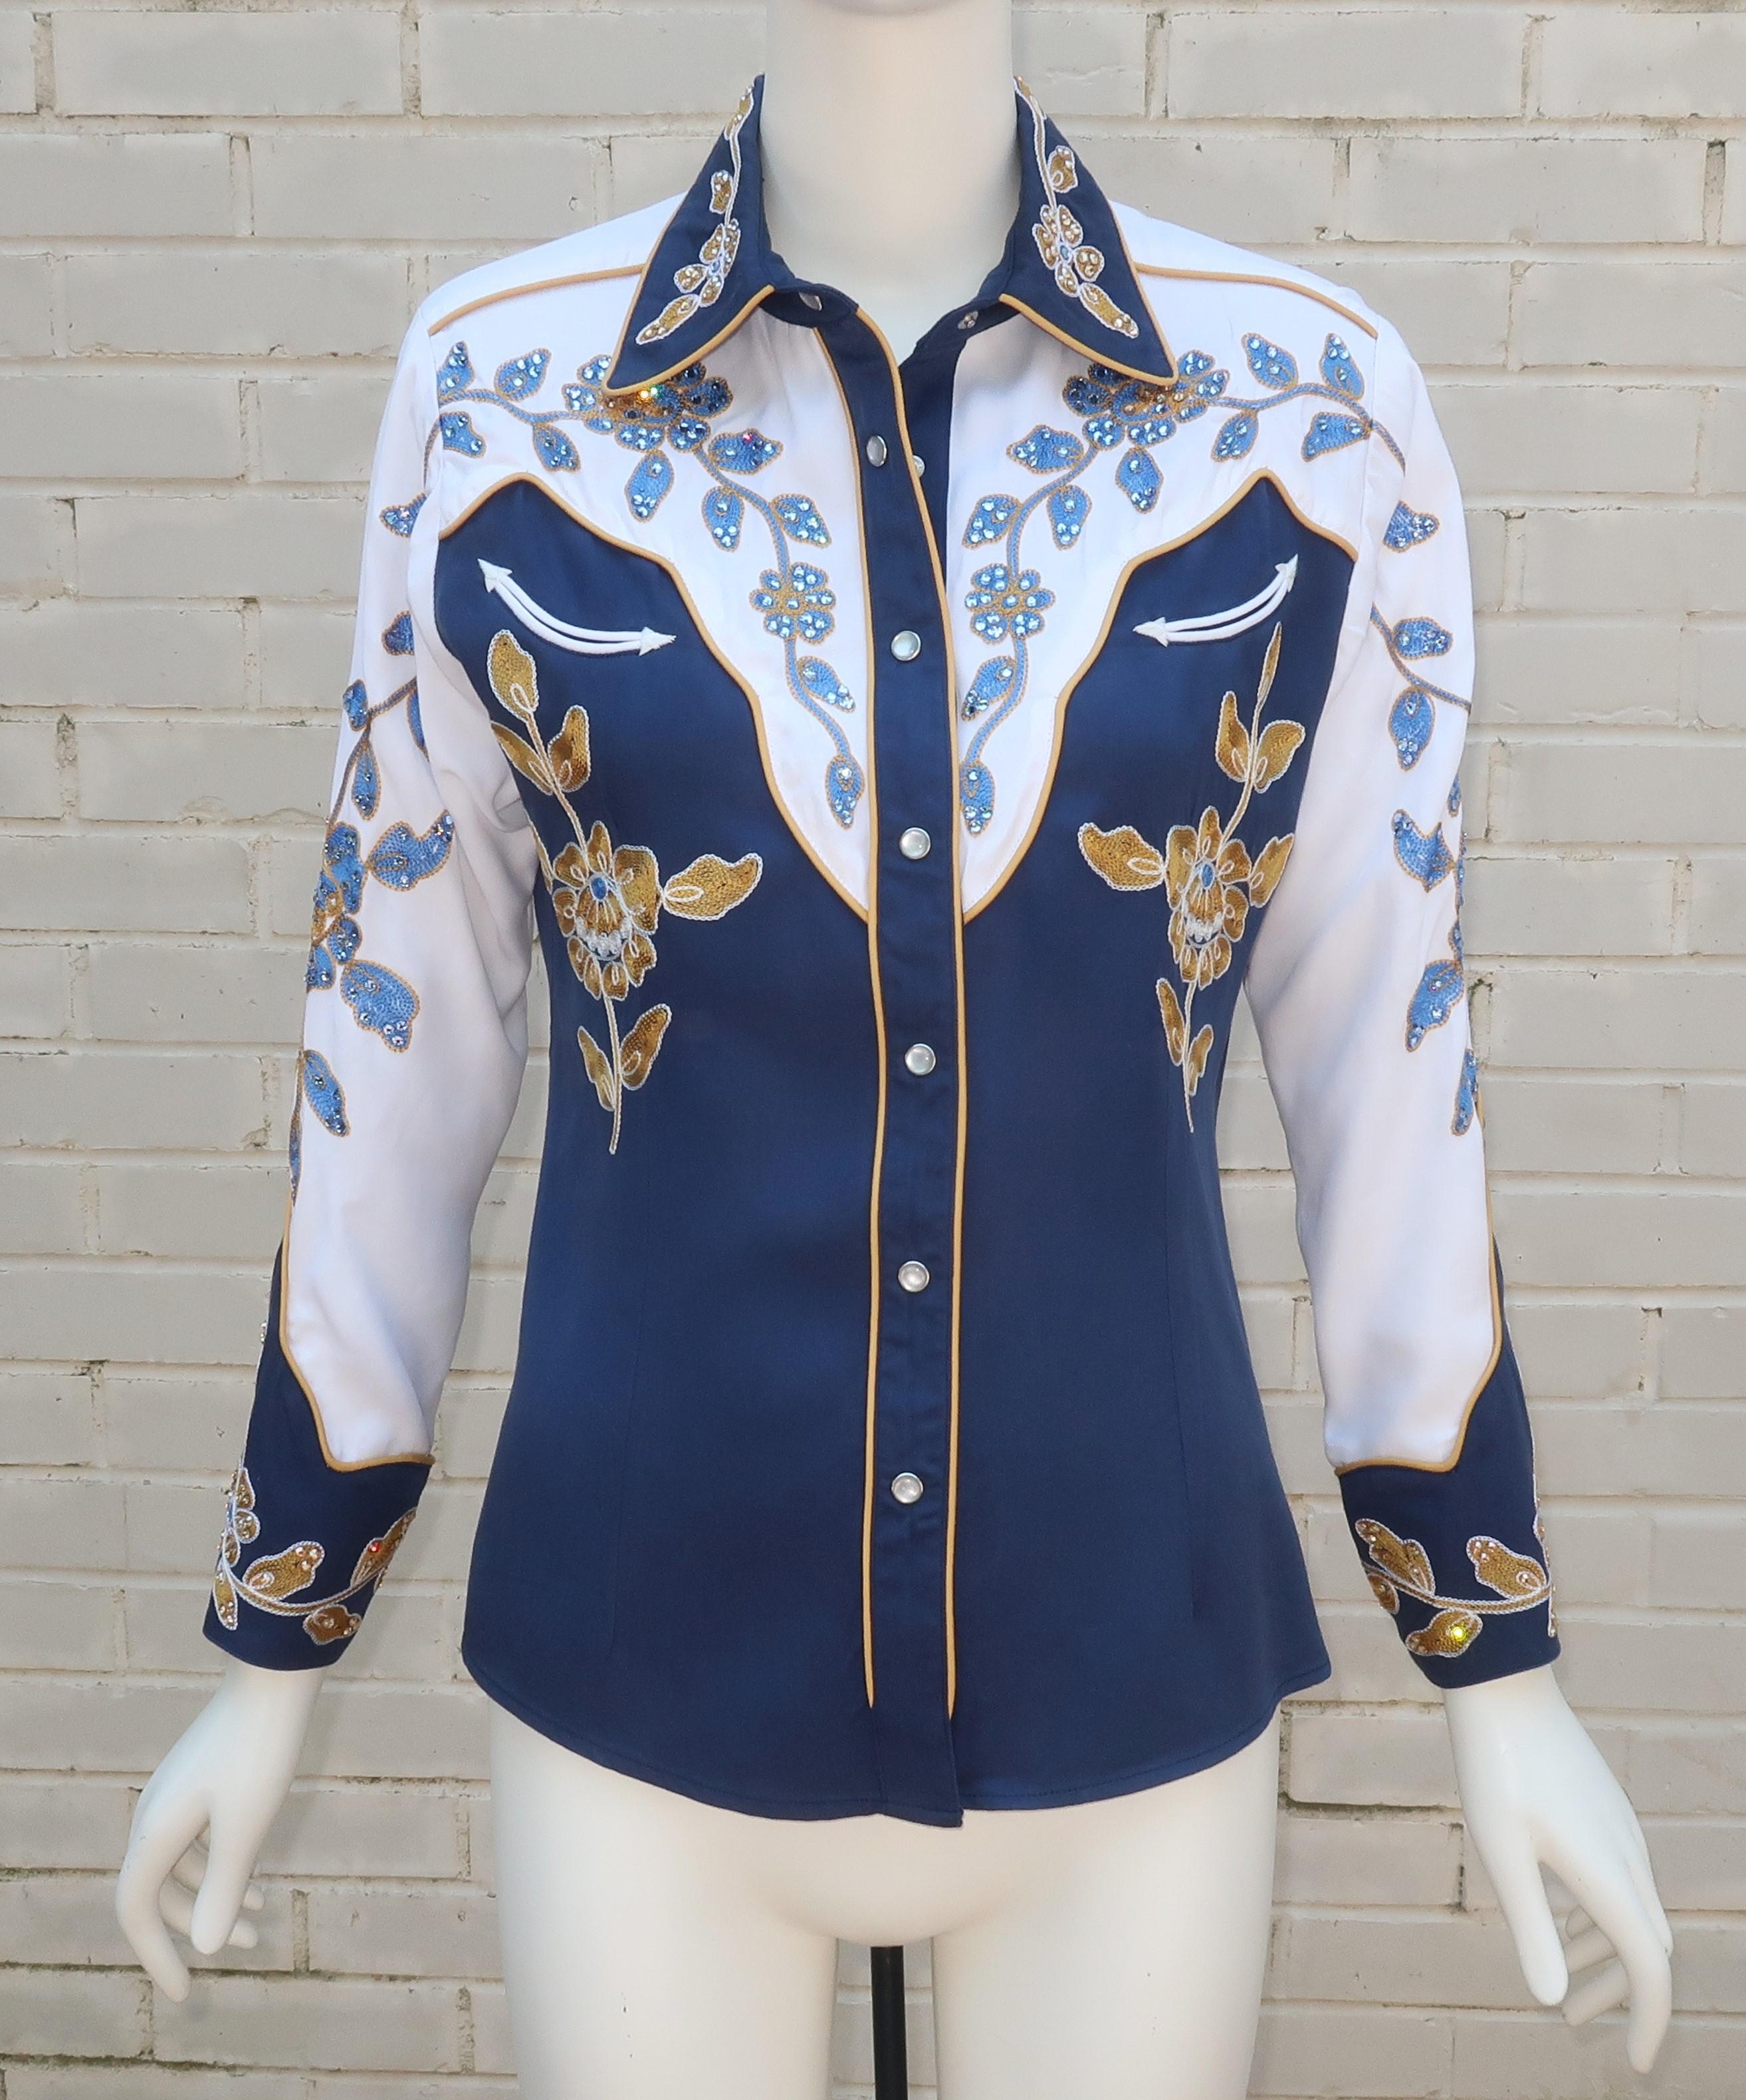 Go West , young woman!  And be sure to take your best western wear with you especially if it is by the iconic American brand, H Bar C.  This contemporary version of the Charleston shirt offers a great combination of classic western styling in a